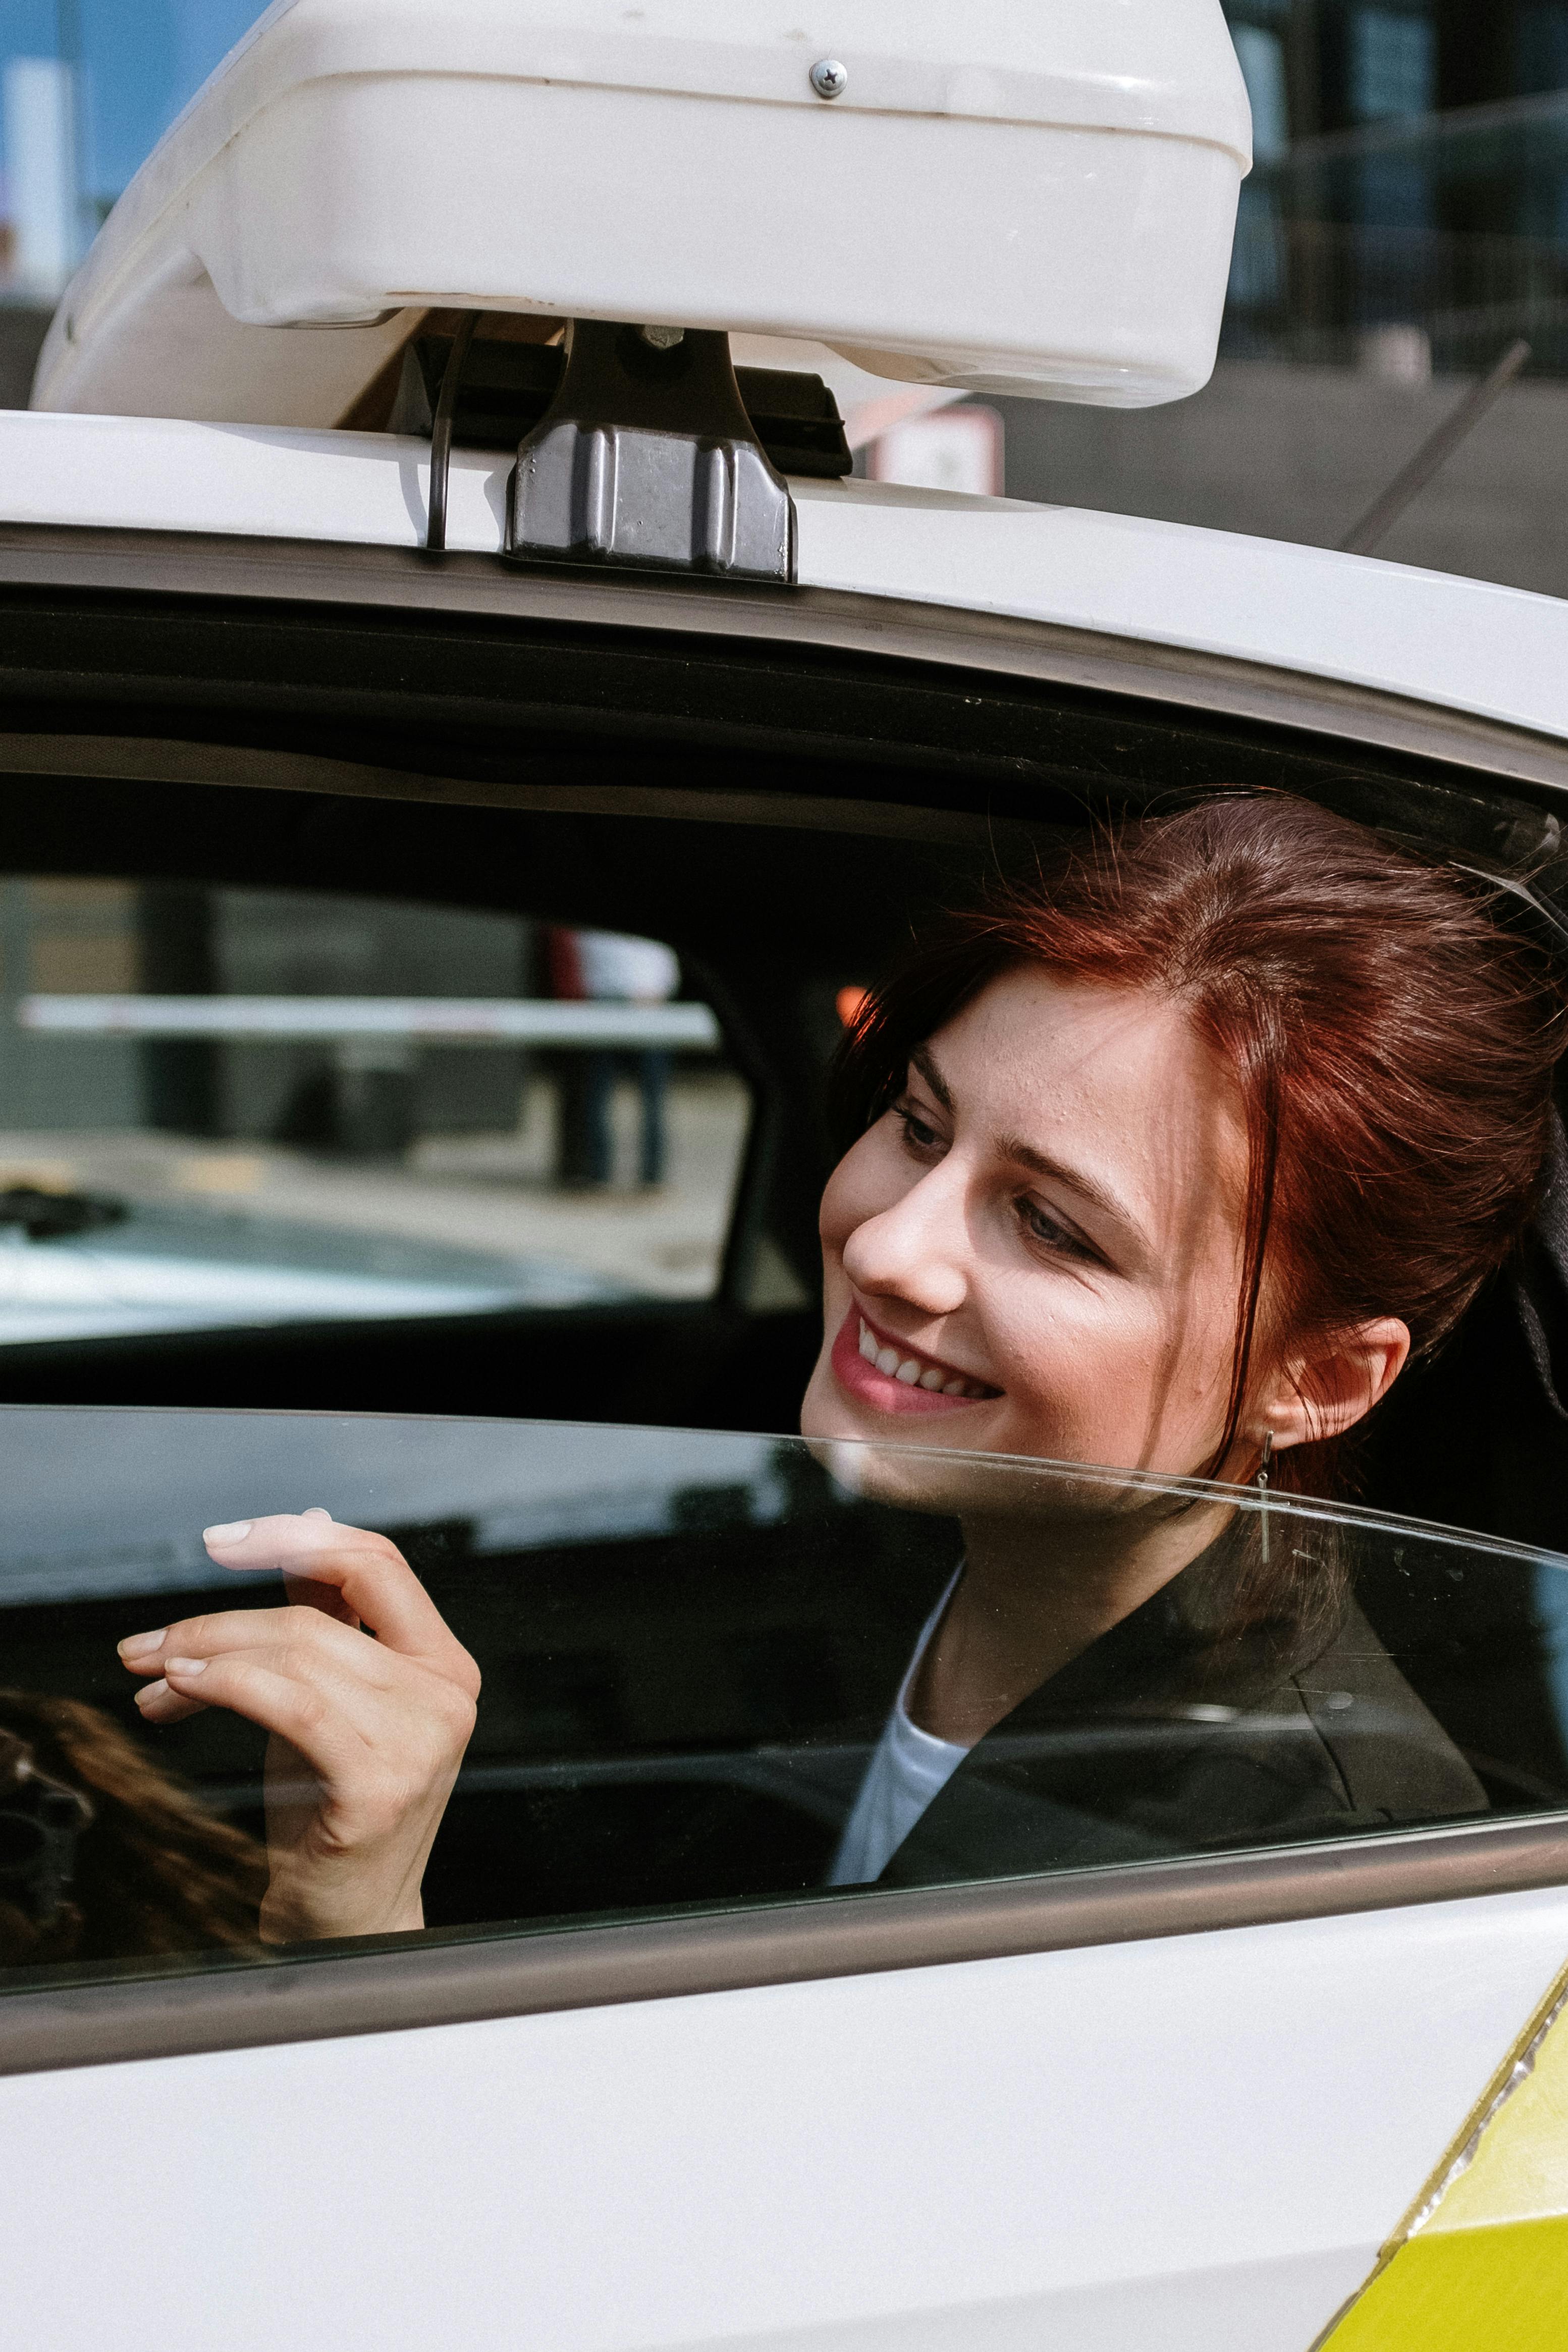 A smiling woman looking out a car window | Source: Pexels